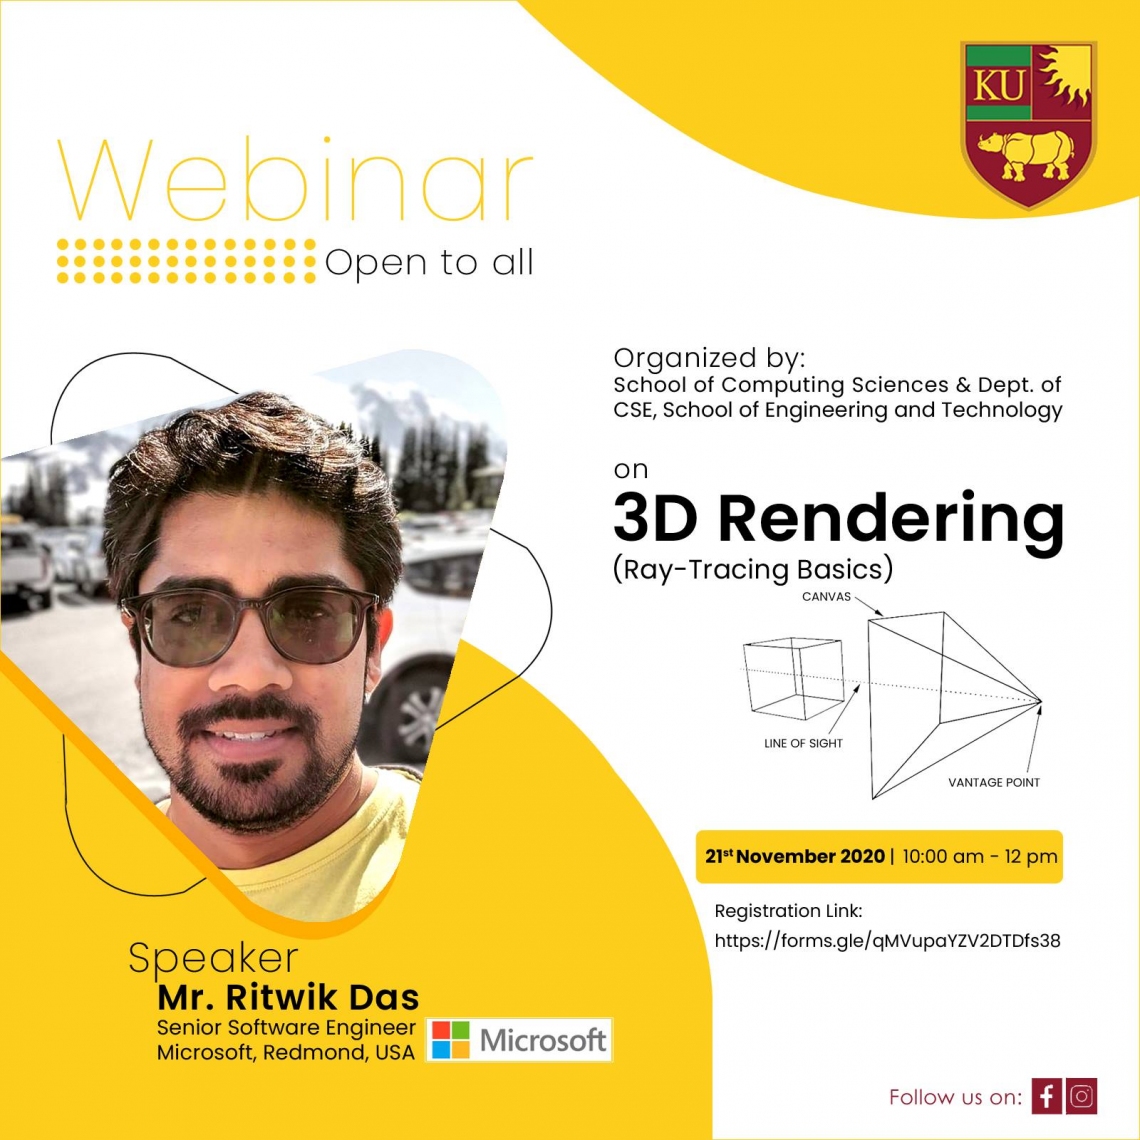 Webinar on the topic, "3D Rendering (Ray-tracing basics)" with expert Mr Ritwik Das, Senior Software Engineer, Microsoft, Redmond, USA